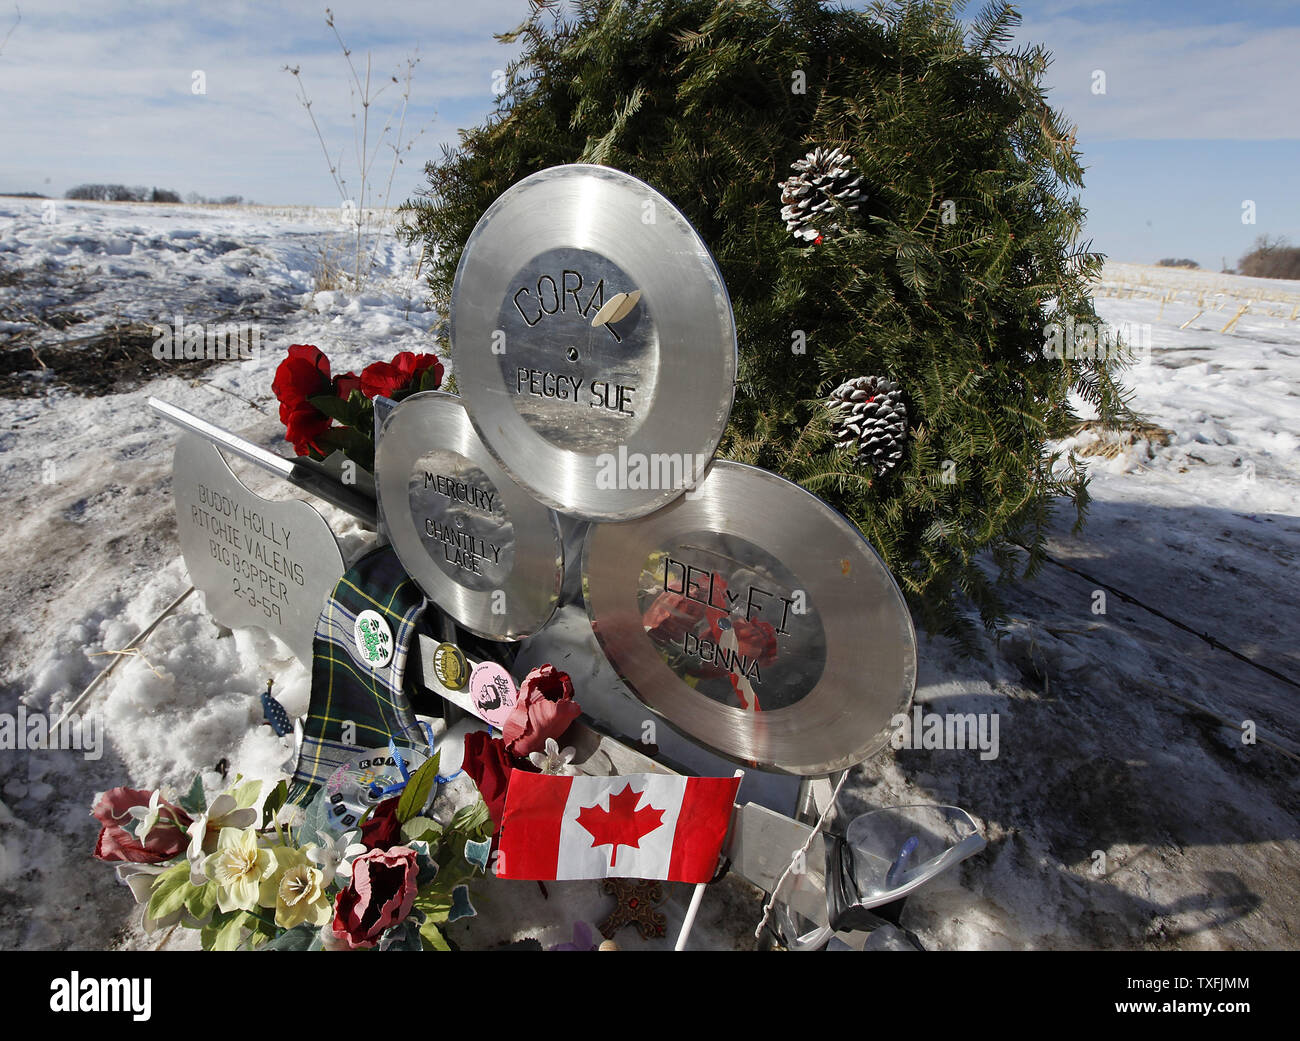 Flowers and tributes are left at the site of the plane crash that killed Buddy Holly, Ritchie Valens and J. P. 'The Big Bopper' Richardson near Clear Lake, Iowa on February 2, 2009. Singer Don McLean coined the phrase 'the day the music died' in his hit song American Pie referring to the death of the three rock 'n' roll pioneers in the early morning hours of February 3, 1959. Thousands of people descended upon Clear Lake to celebrate the 50th anniversary of 'the day the music died'.   (UPI Photo/Brian Kersey) Stock Photo